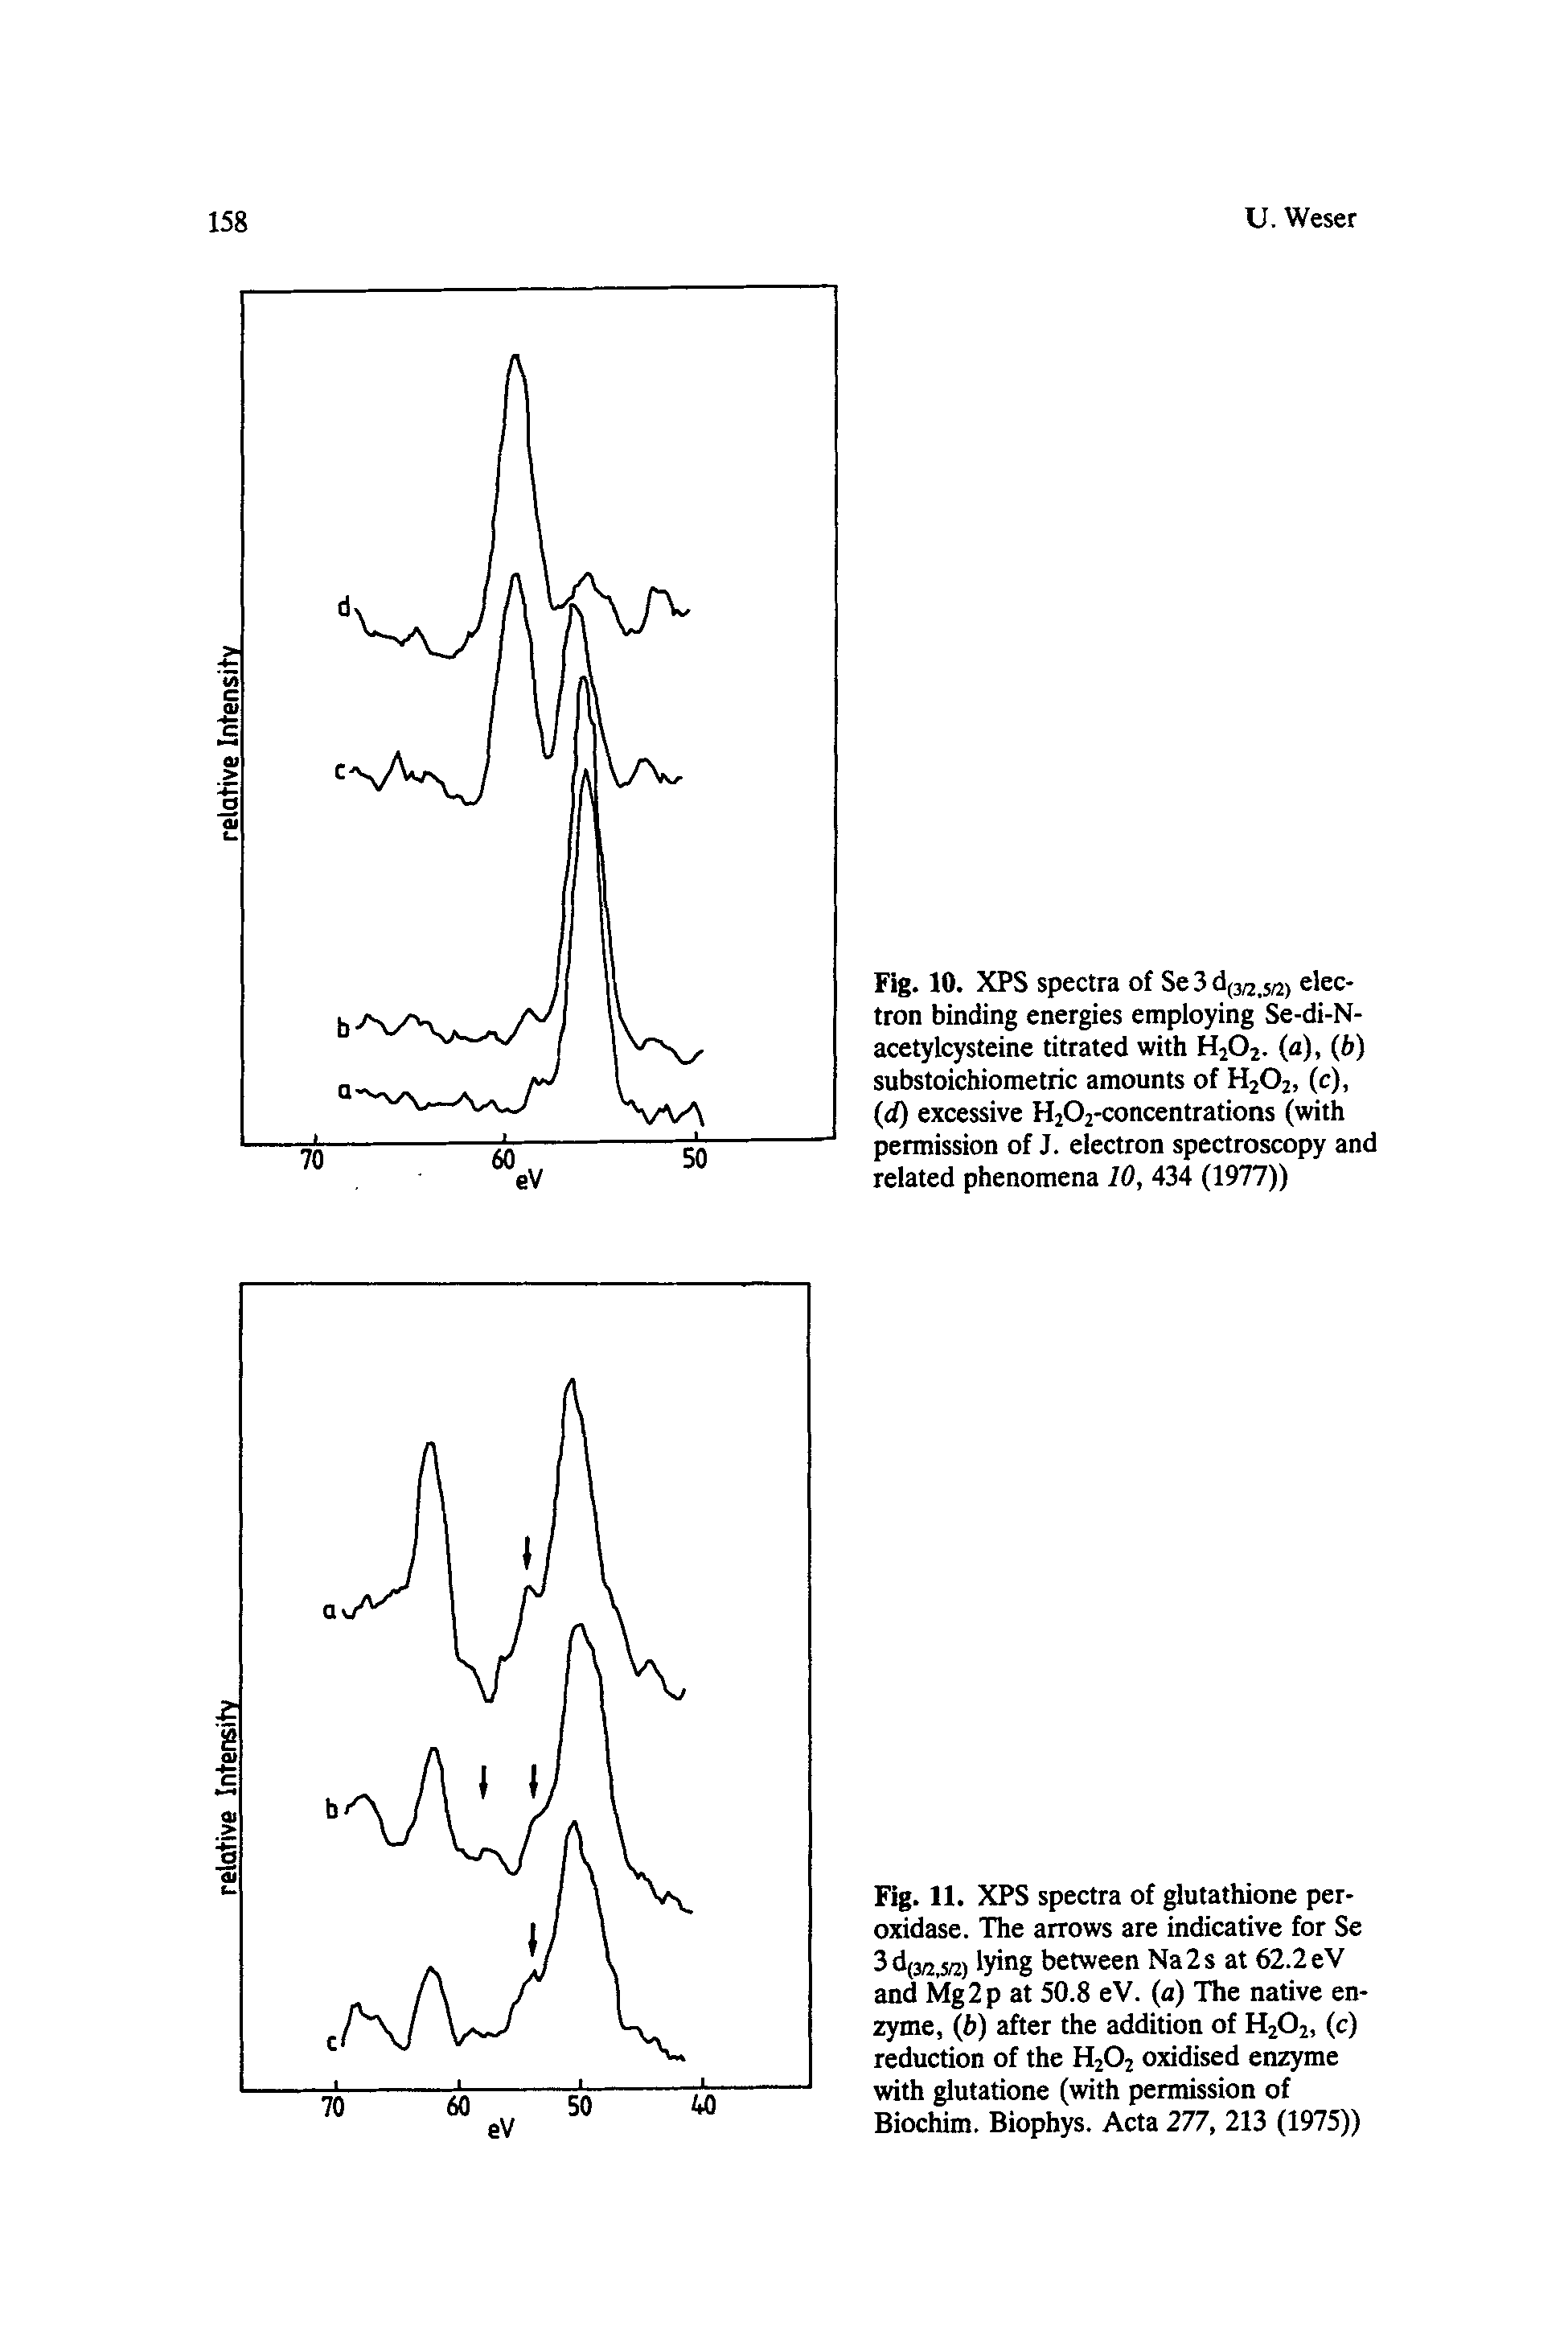 Fig. 10. XPS spectra of Se 3 electron binding energies employing Se-di-N-acetylcysteine titrated with H2O2. (a), (b) substoichlometric amounts of H2O2, (c), (d) excessive H202-concentrations (with permission of J. electron spectroscopy and related phenomena 10, 434 (1977))...